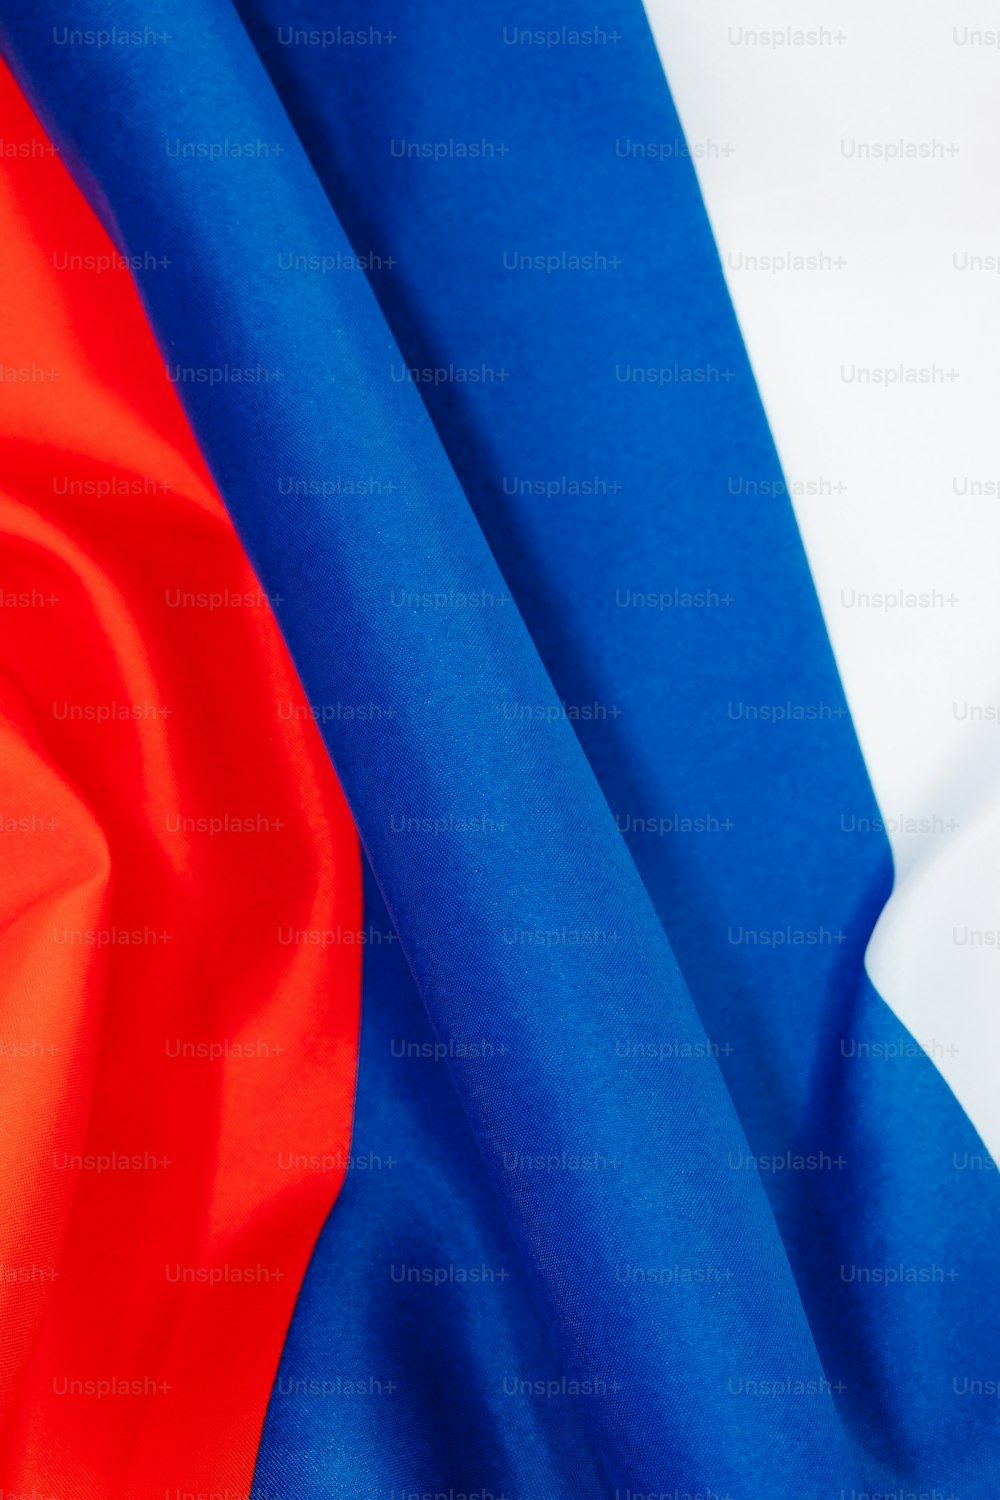 100+ Free Russian Flag & Russia Images - Pixabay